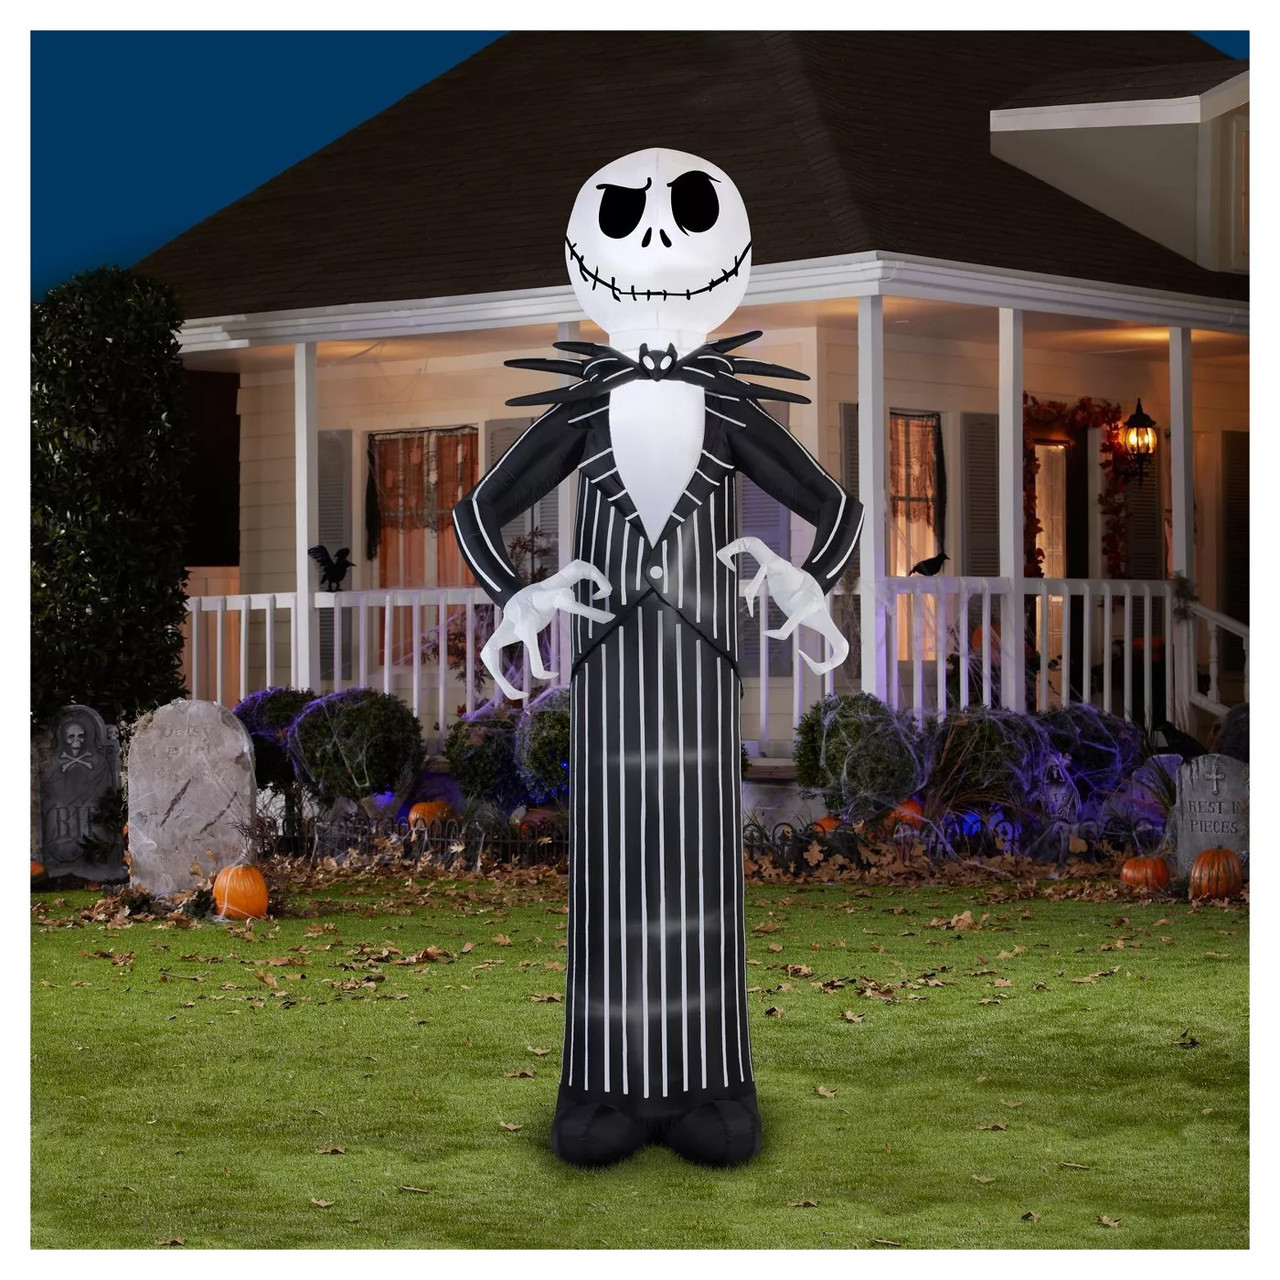 120" tall Lighted Jack Skellington Giant air blown airblown Inflatable  Nightmare before Christmas Yard Decor Outdoor Decoration